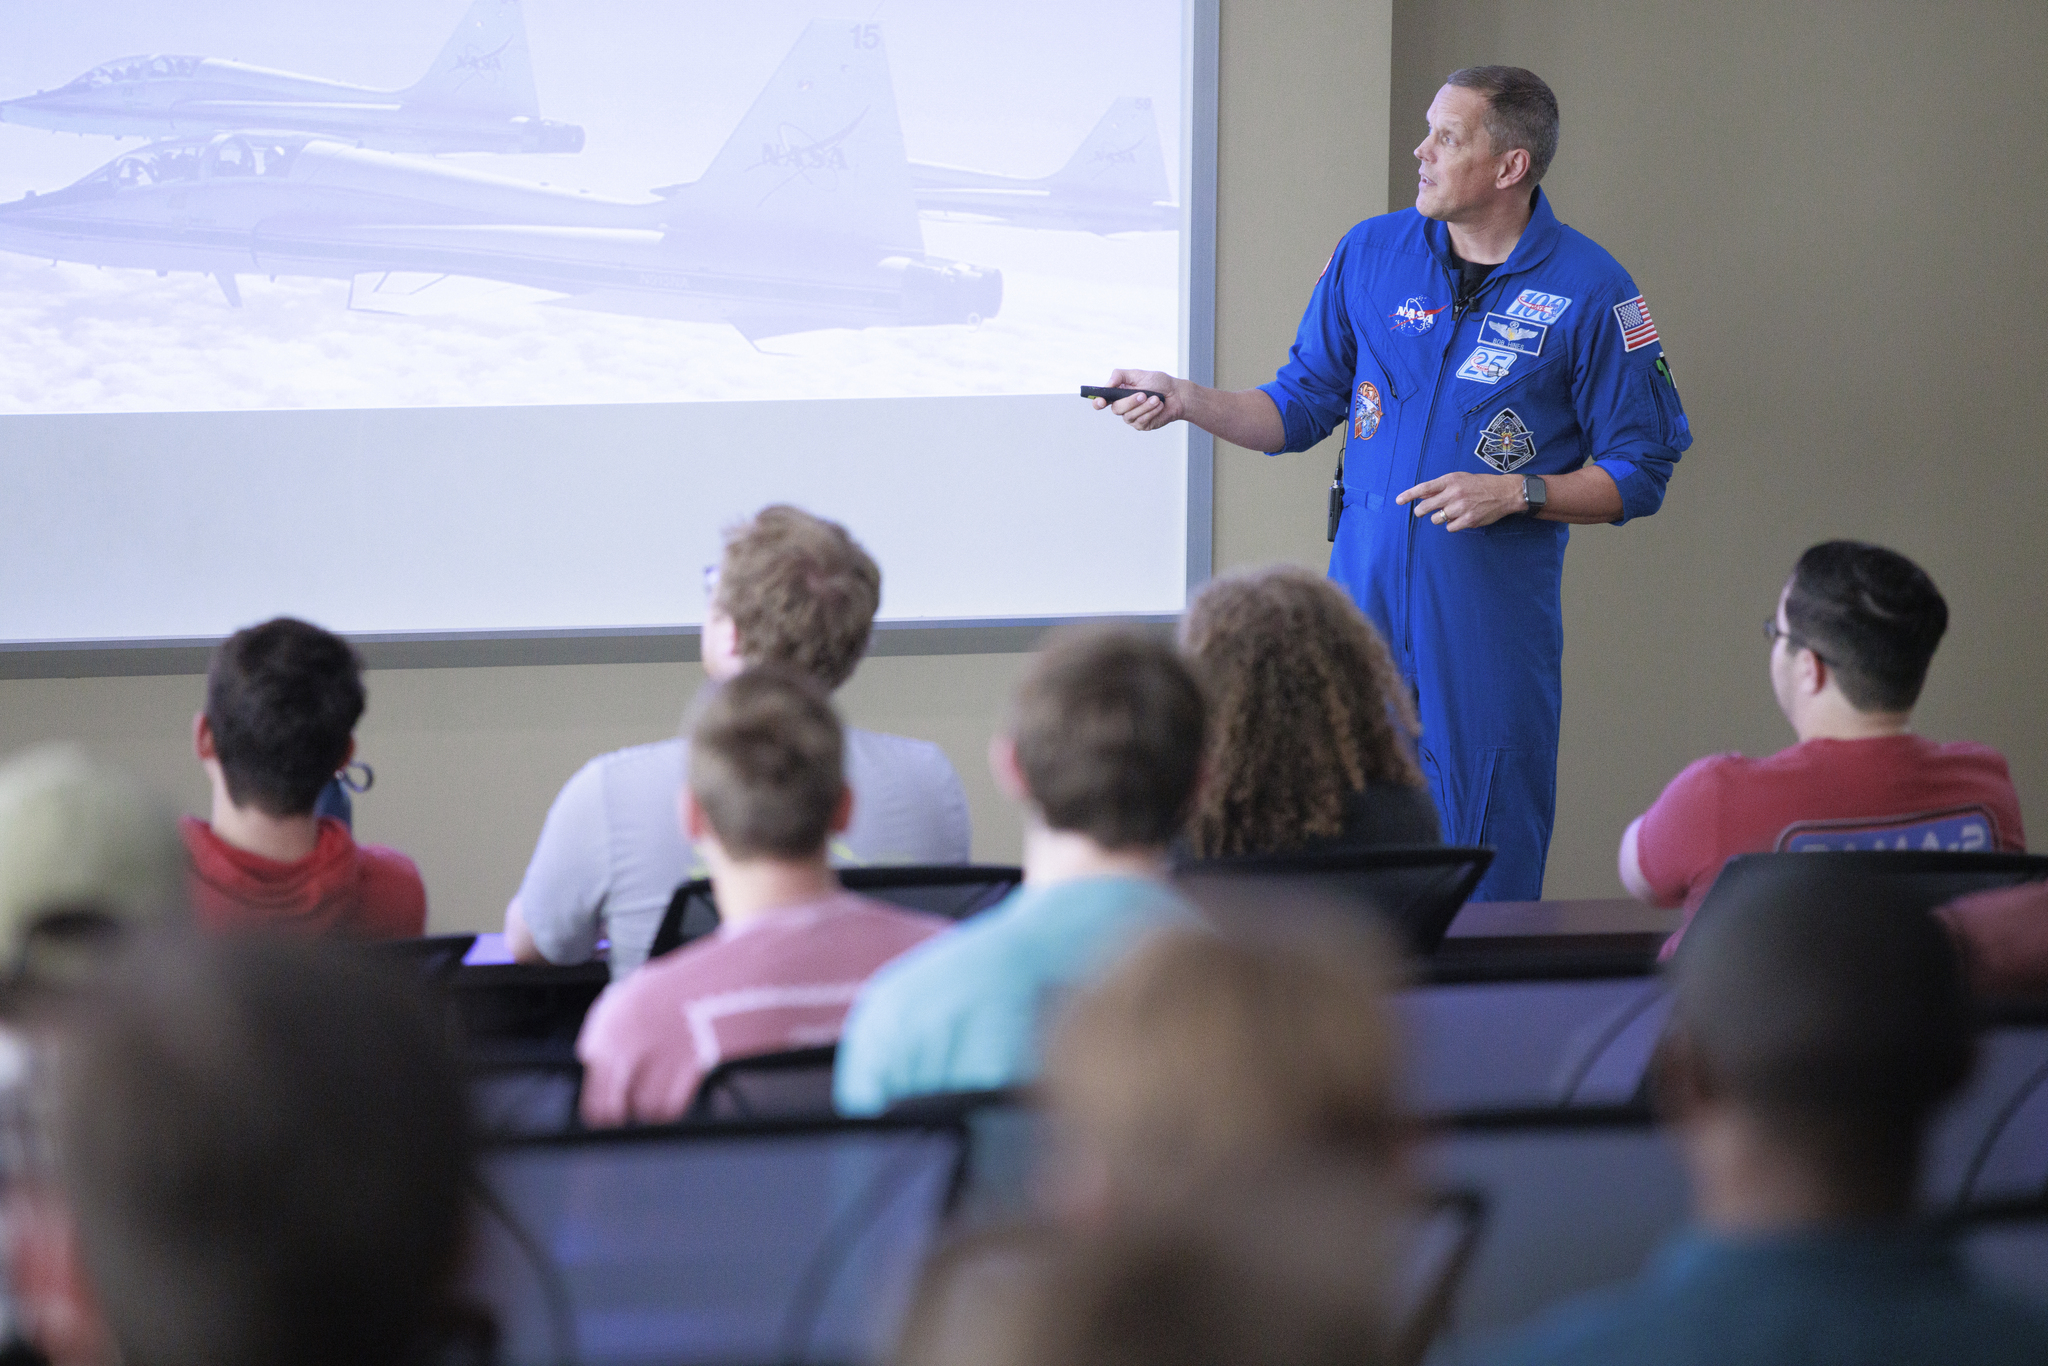 NASA astronaut Bob Hines delivers a presentation entitled, “An Astronaut’s Journey,” during the 8th annual Space Days at the UA on Nov. 16.